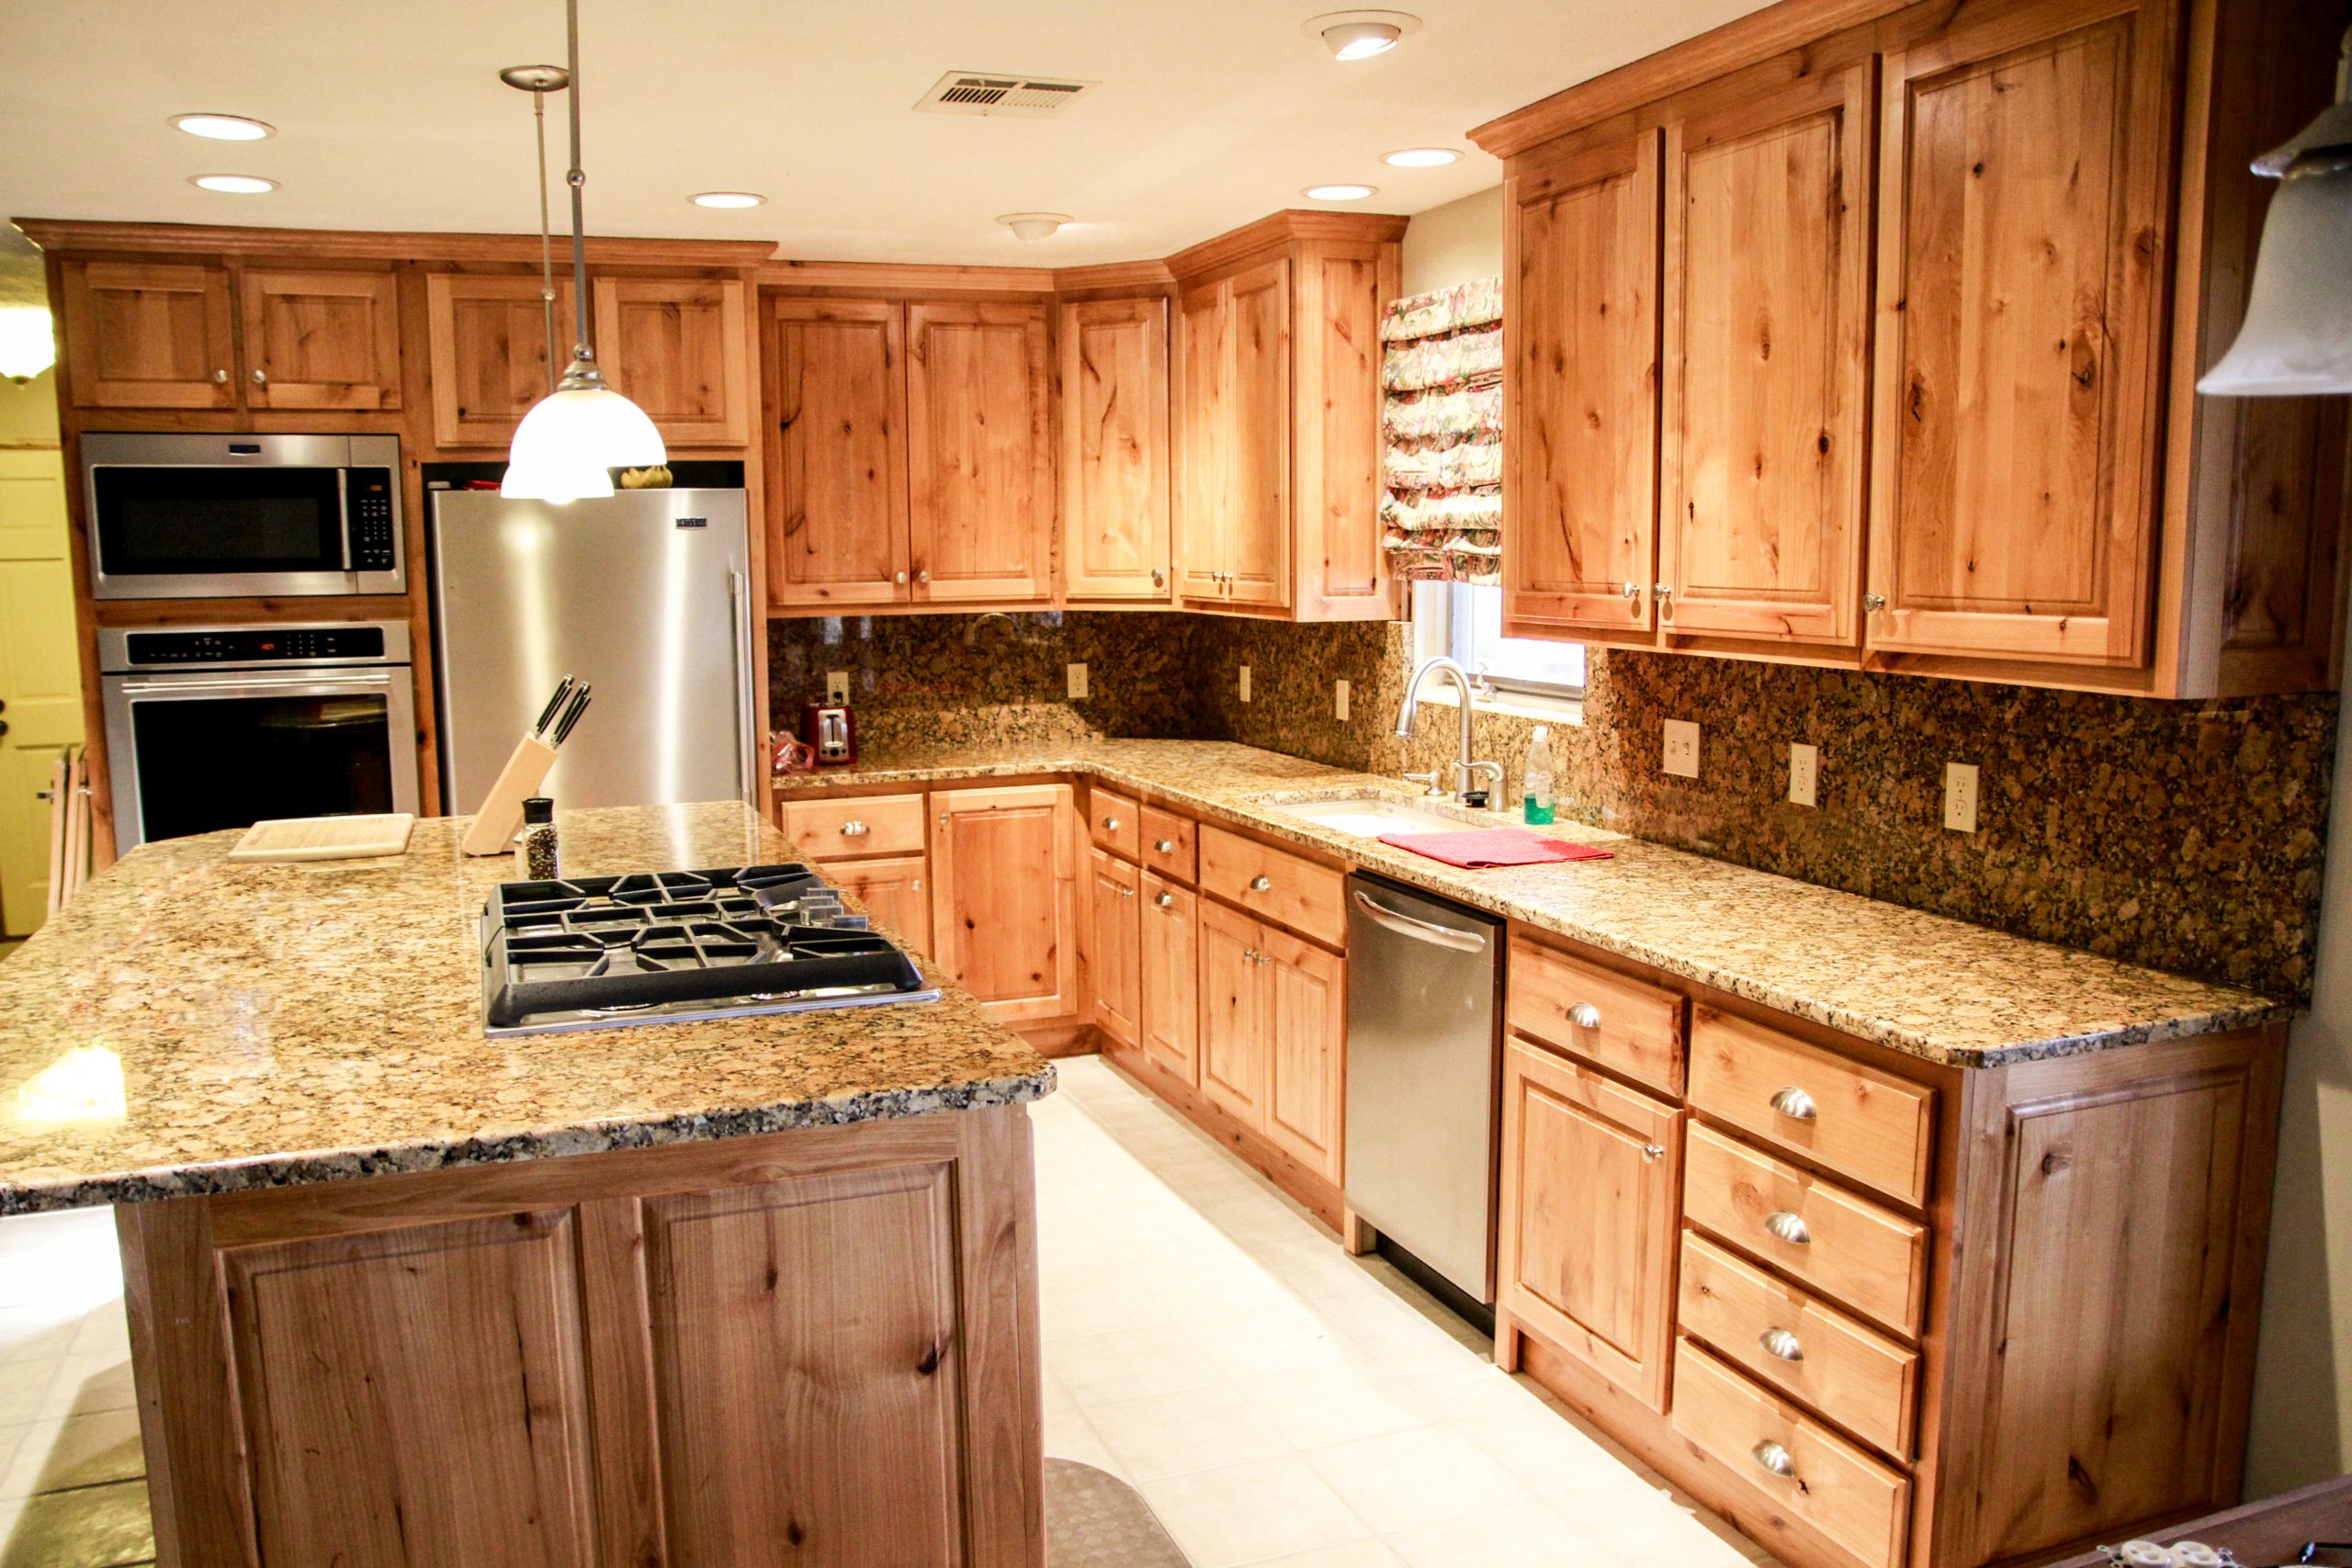 Farmhouse Kitchen Cabinets in Monmouth Beach NJ, Buy custom kitchen cabinets factory direct in Monmouth Beach NJ, Buy custom shaker cabinets factory direct in Monmouth Beach NJ